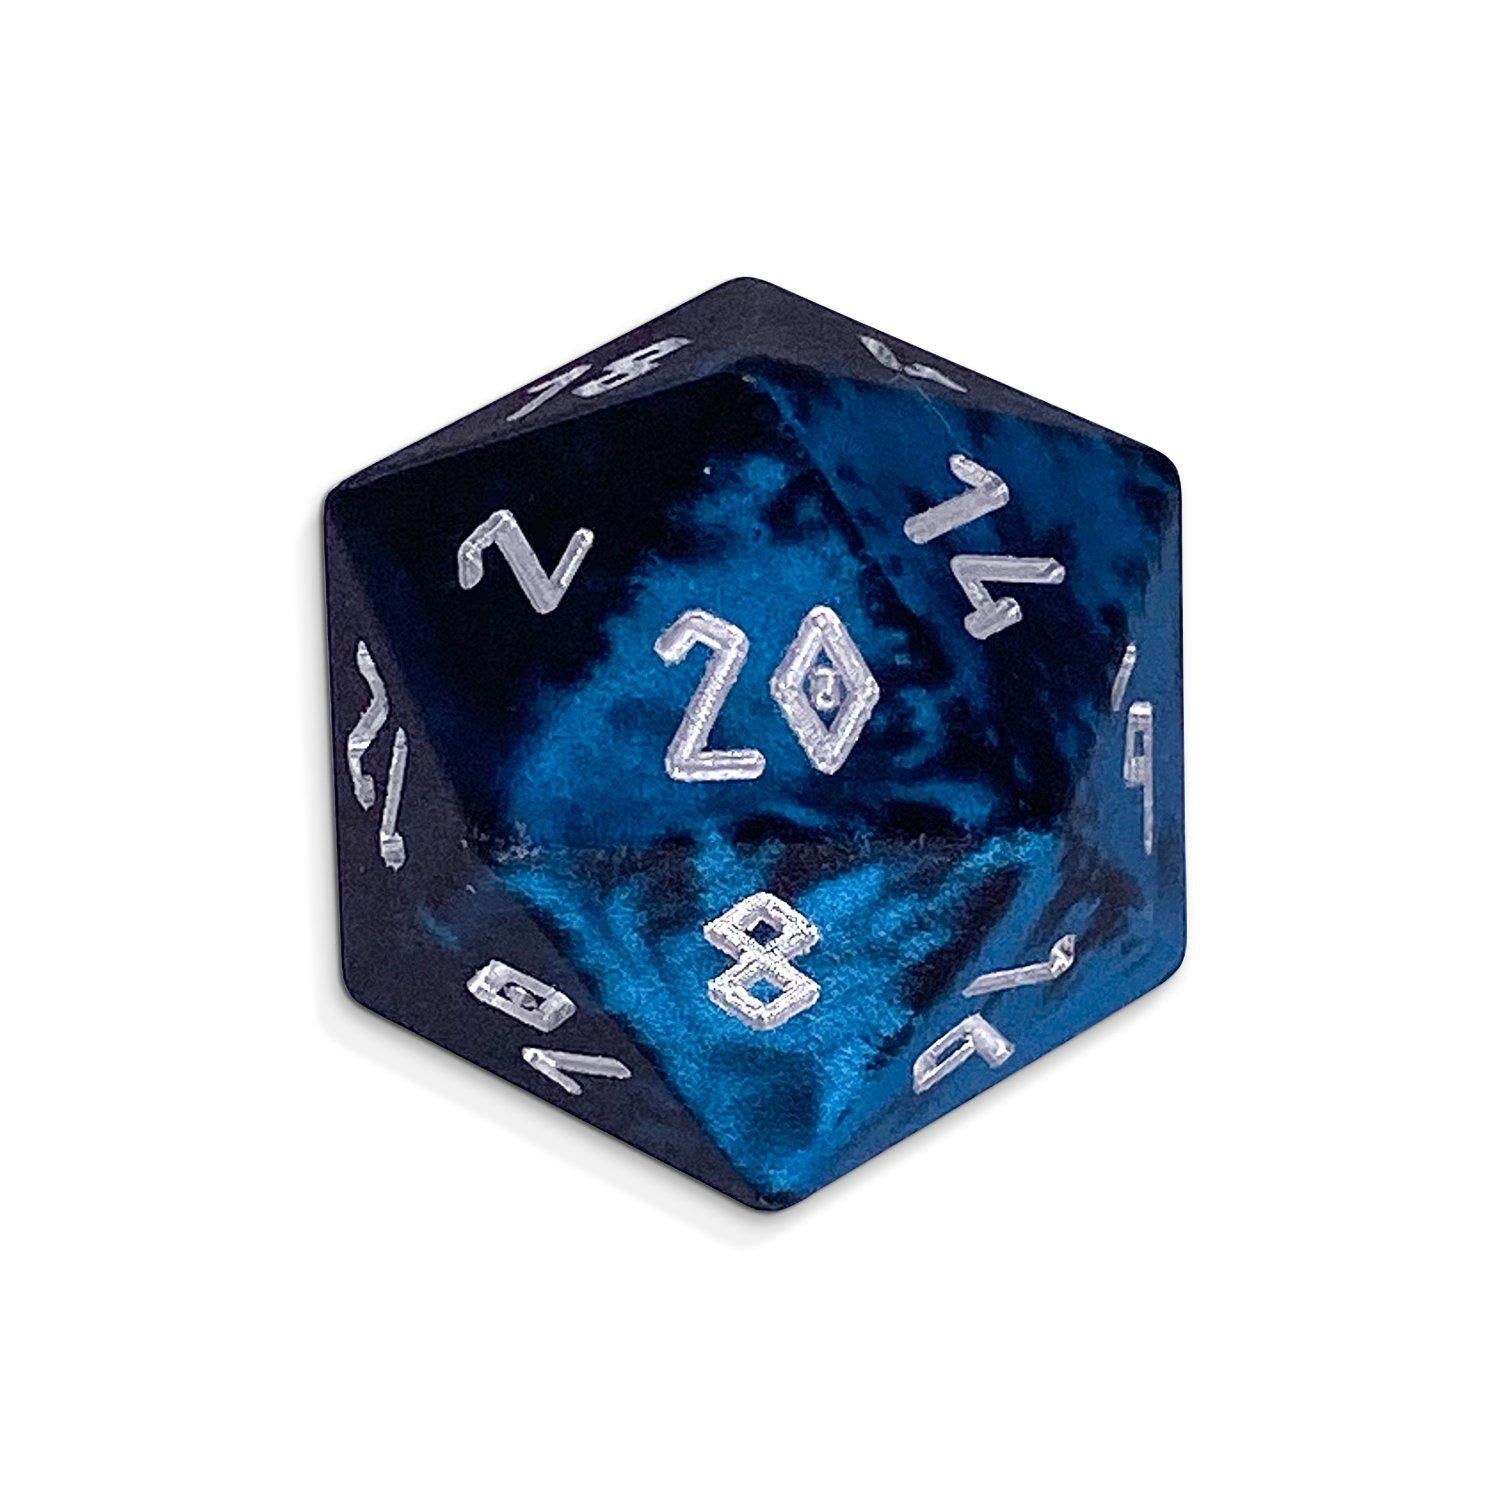 Single Wondrous Dice® D20 in Willow of the Wisp by Norse Foundry® 6063 Aircraft Grade Aluminum - NOR 02426